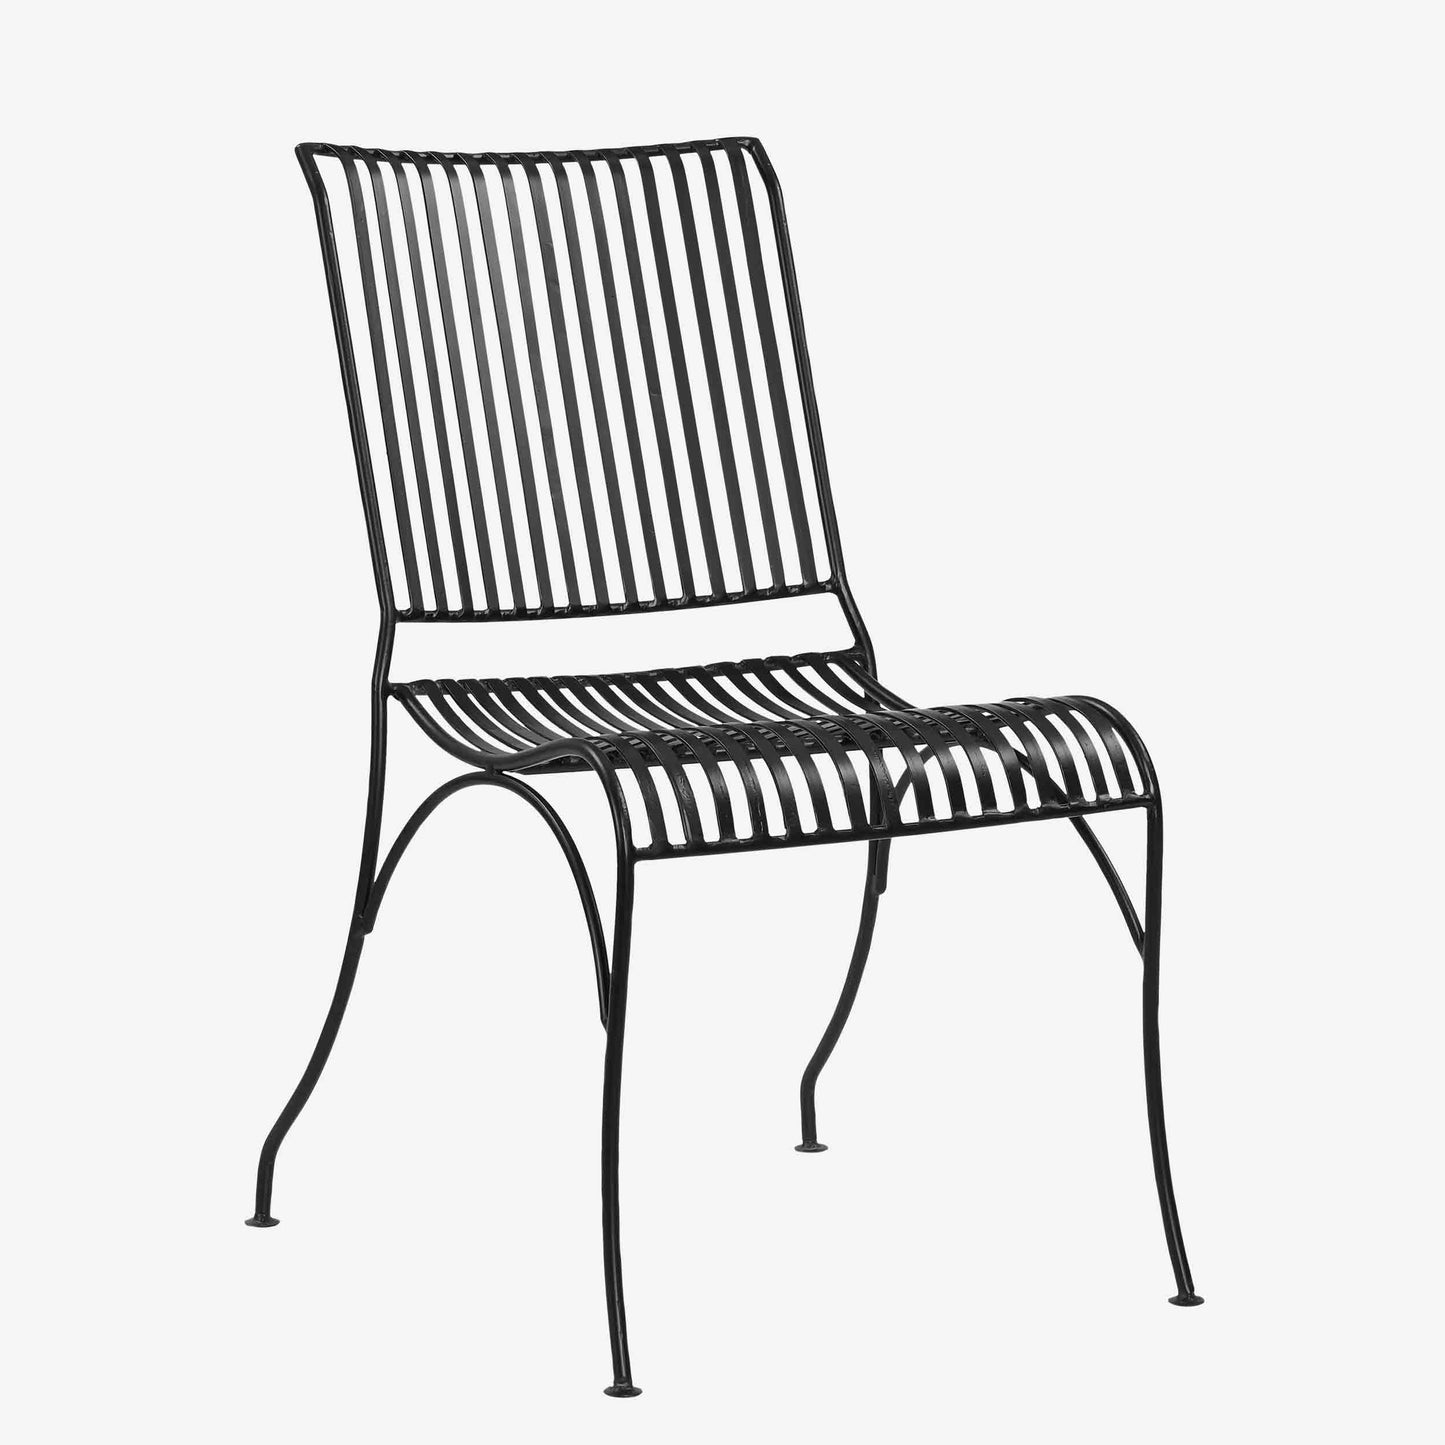 The Tyra Recycled Metal Chair in Black